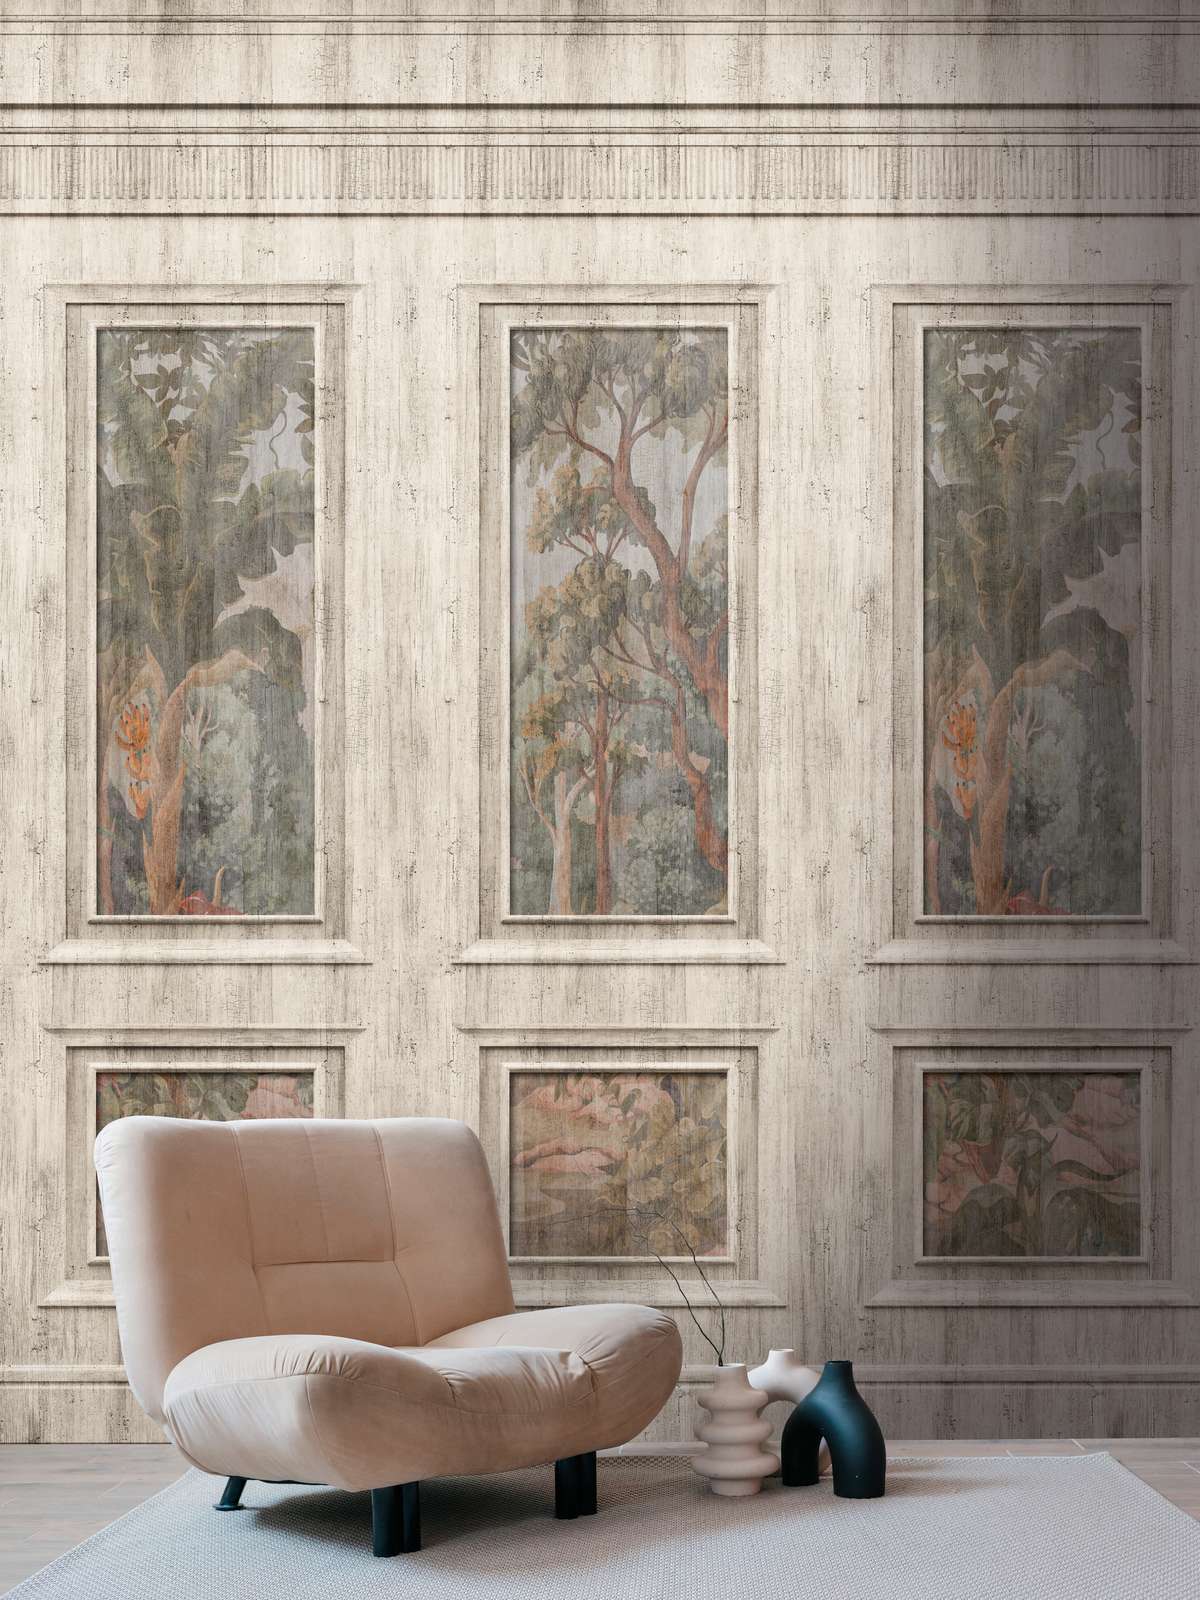             Non-woven motif wallpaper with checkerboard and forest motif in a vintage look - grey, beige
        